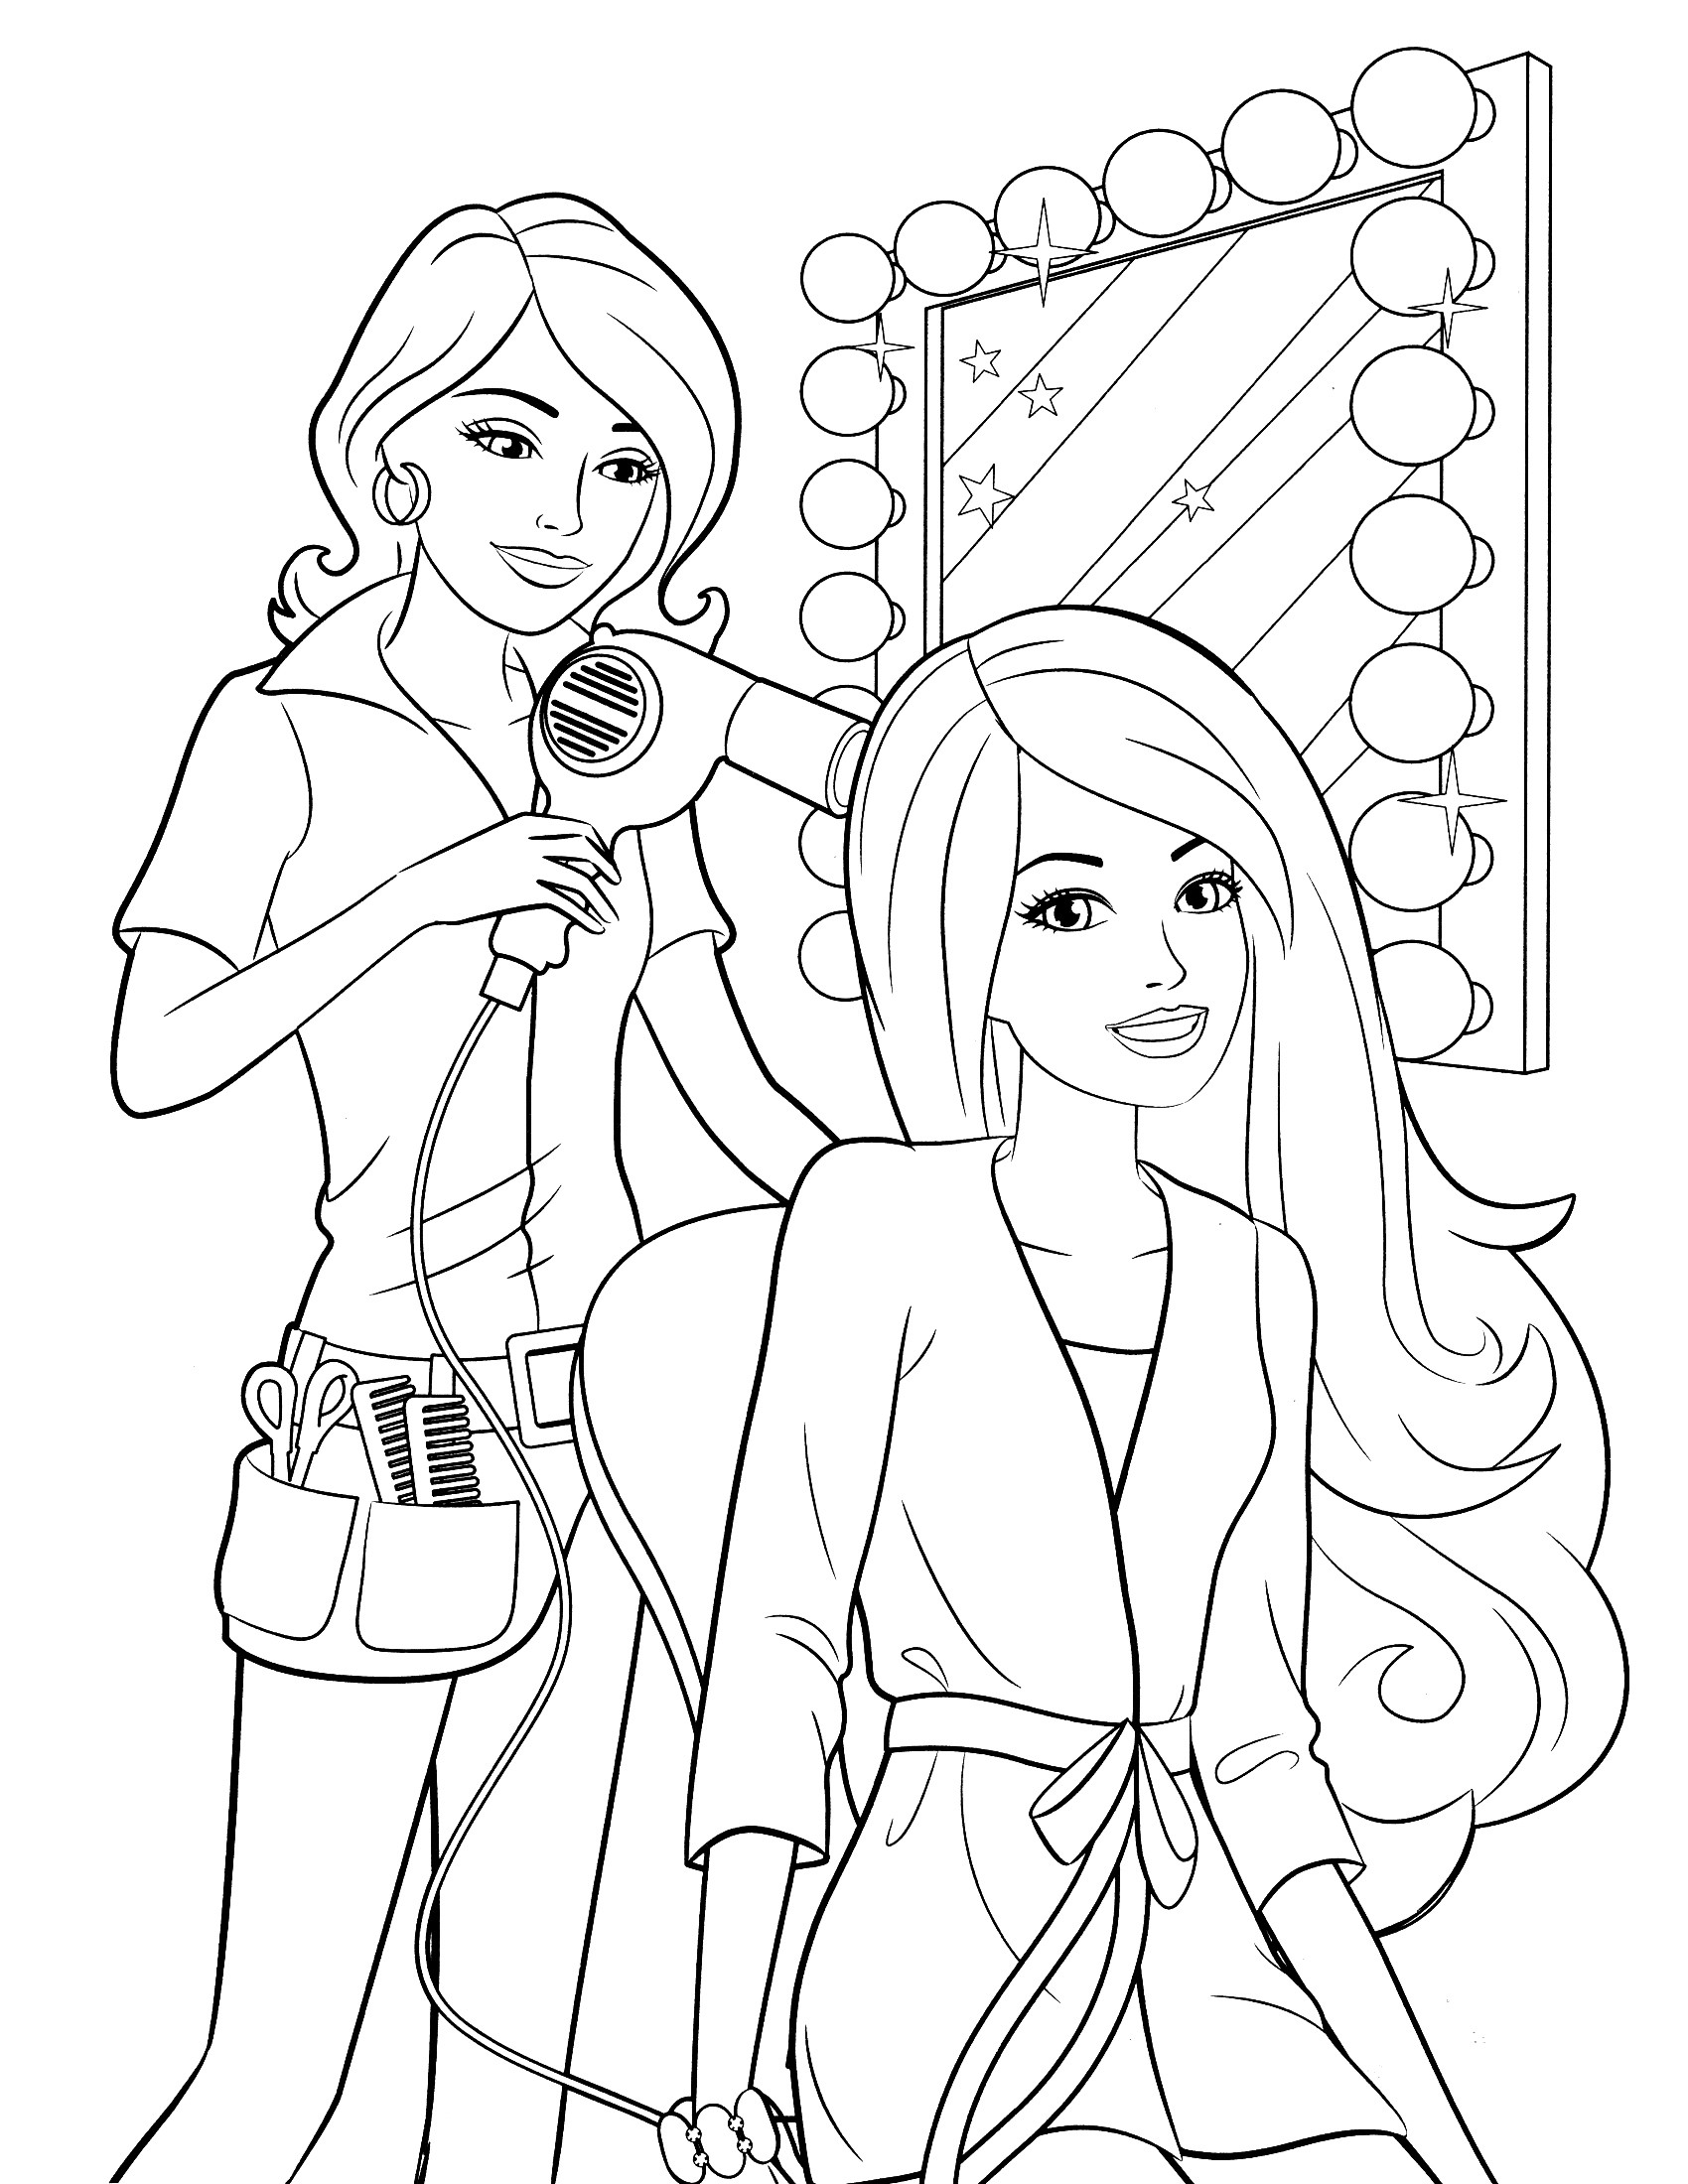 Girl With A Book Coloring Pages
 Coloring Pages for Girls Best Coloring Pages For Kids